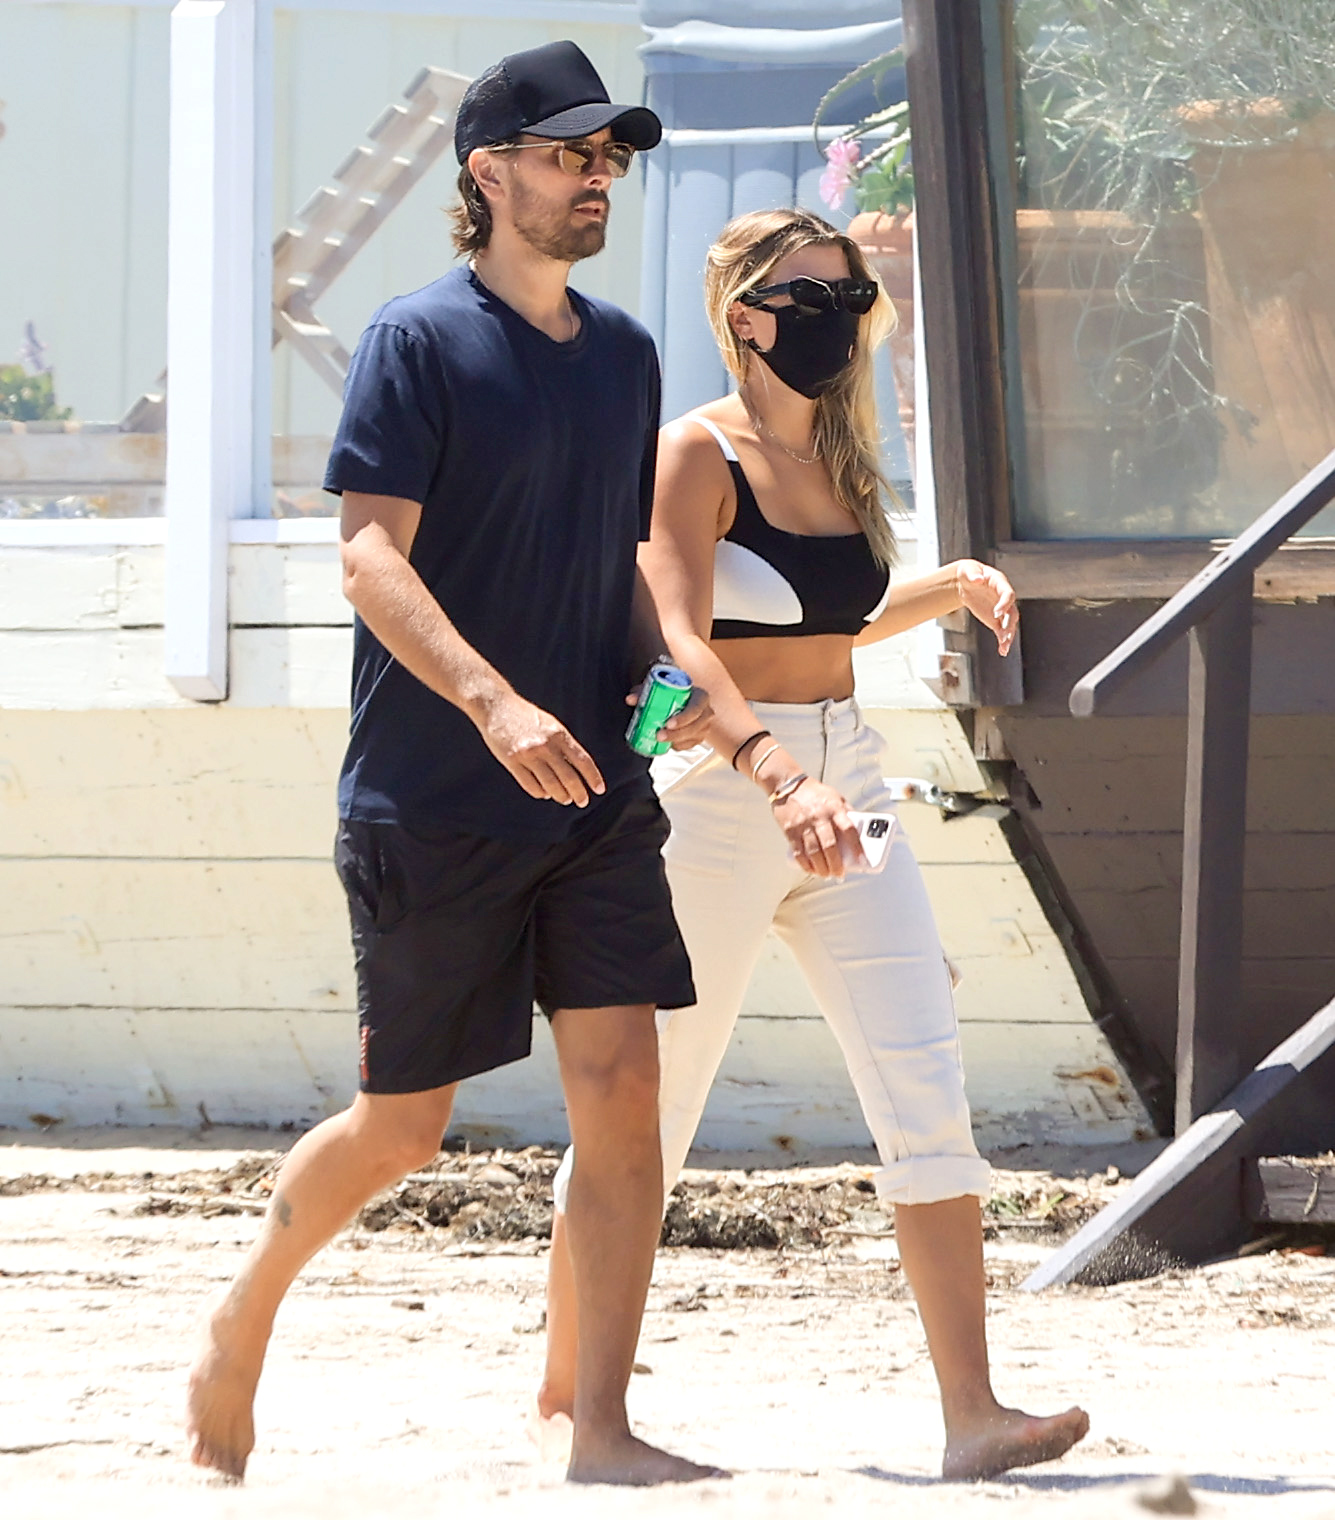 Scott Disick and Sofia Richie Celebrate 4th of July Together Months After Split